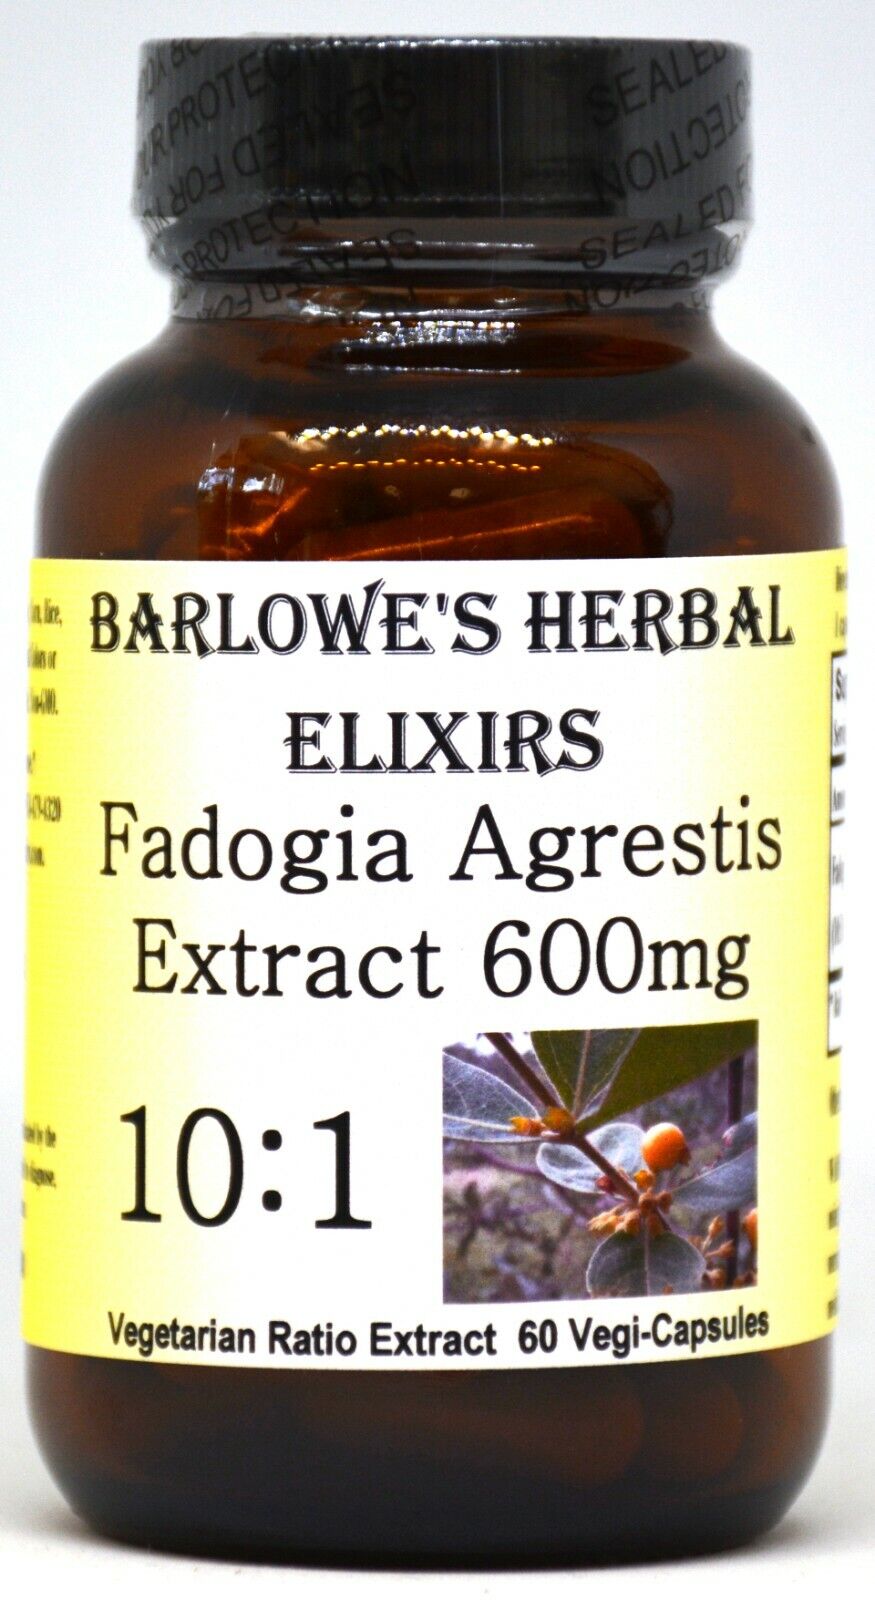 FADOGIA AGRESTIS EXTRACT 祝開店！大放出セール開催中 60 - Stearate 600mg おしゃれ Bottled Free i